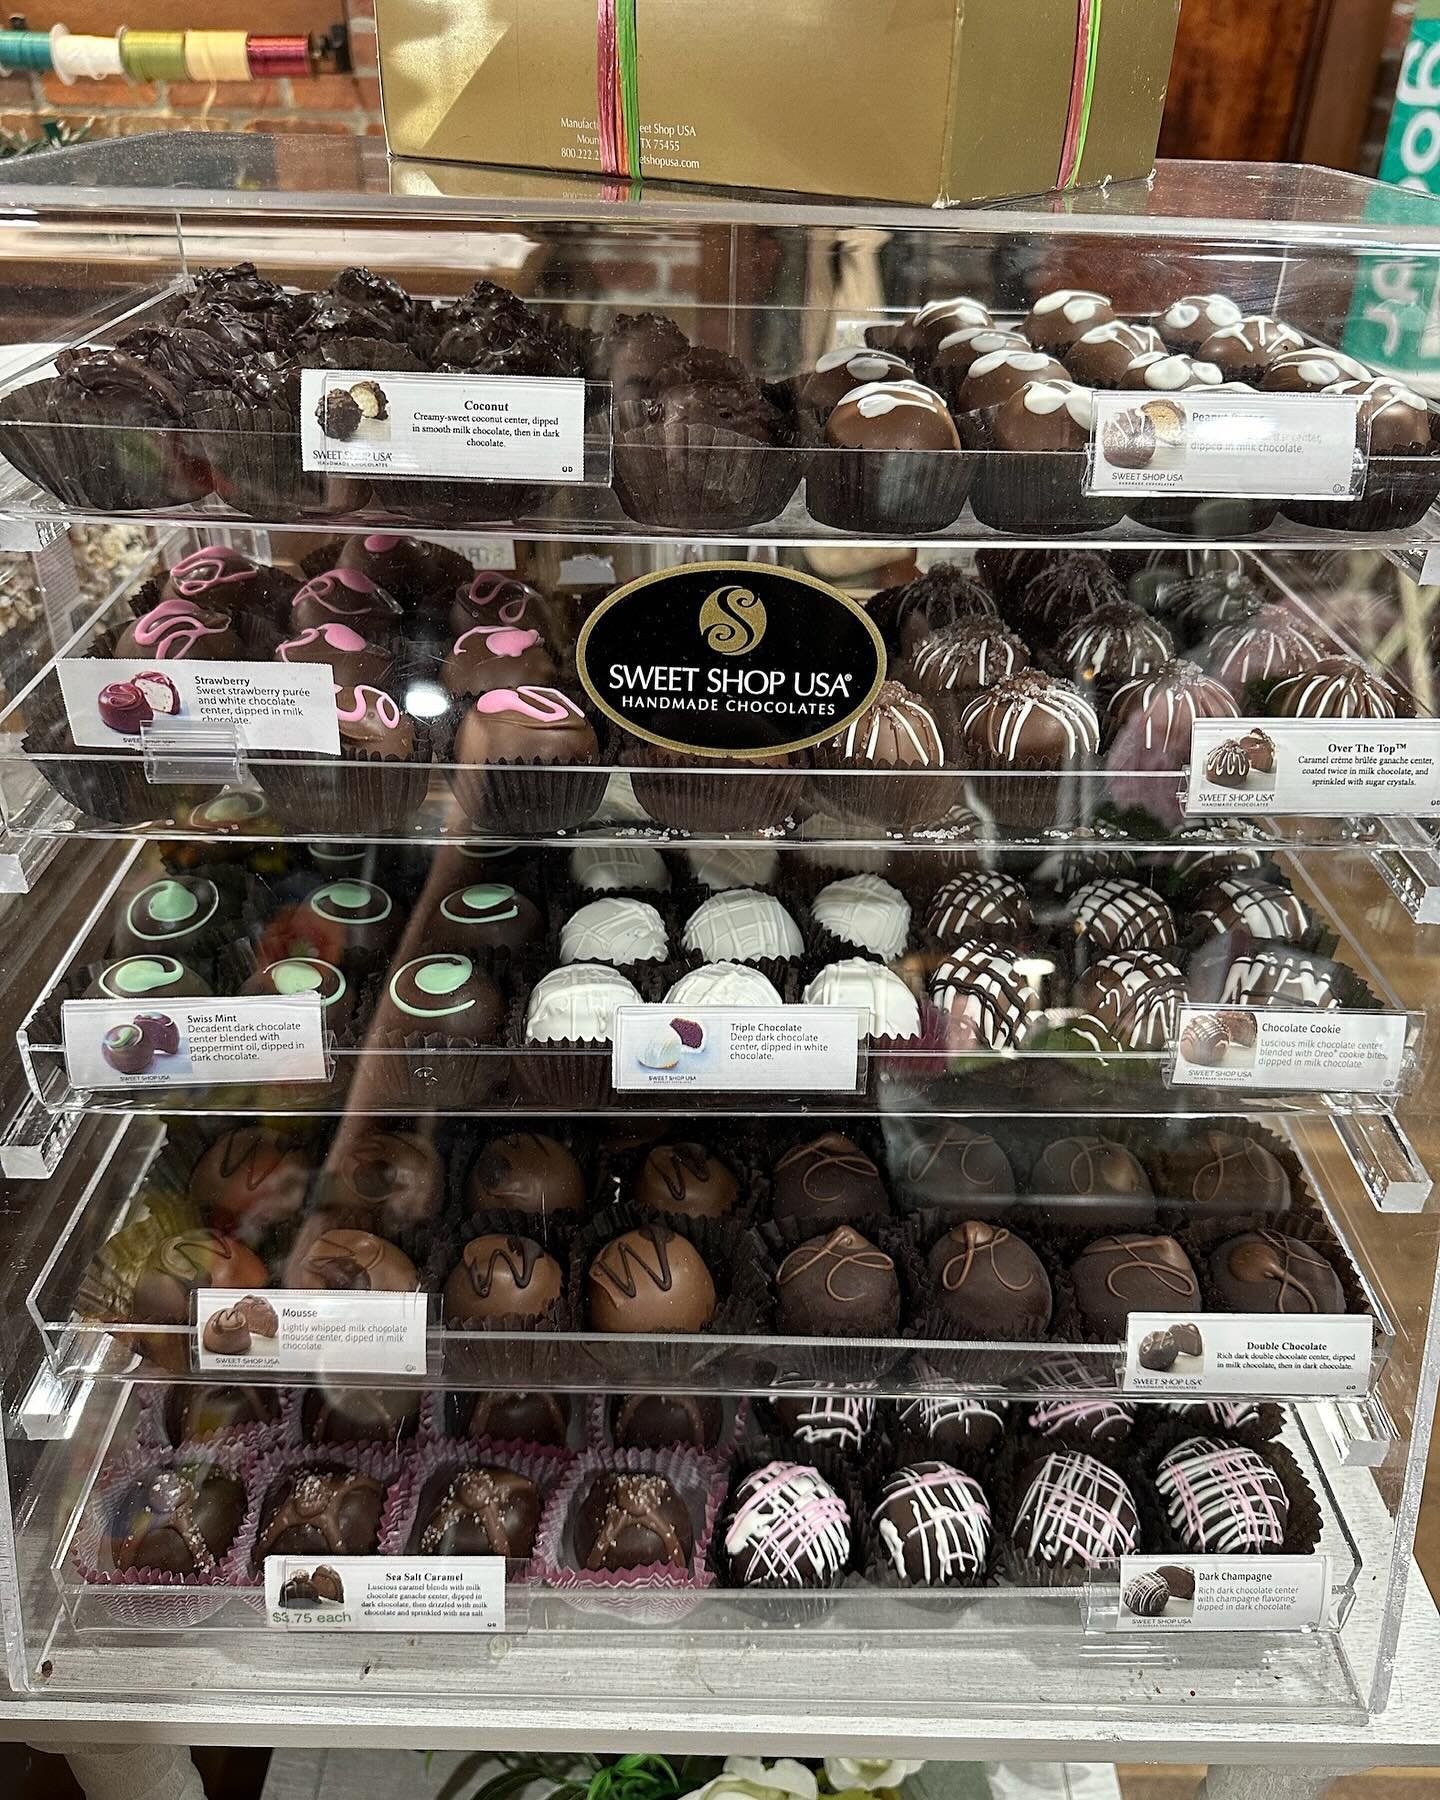 It&rsquo;s National Truffle Day!!

Enjoy our gourmet selection of hand made chocolate truffles. Flavors include:

Peanut Butter
Coconut
Strawberry
Over the Top (caramel cr&egrave;me br&ucirc;l&eacute;e)
Swiss Mint
Triple Chocolate (white, milk &amp; 